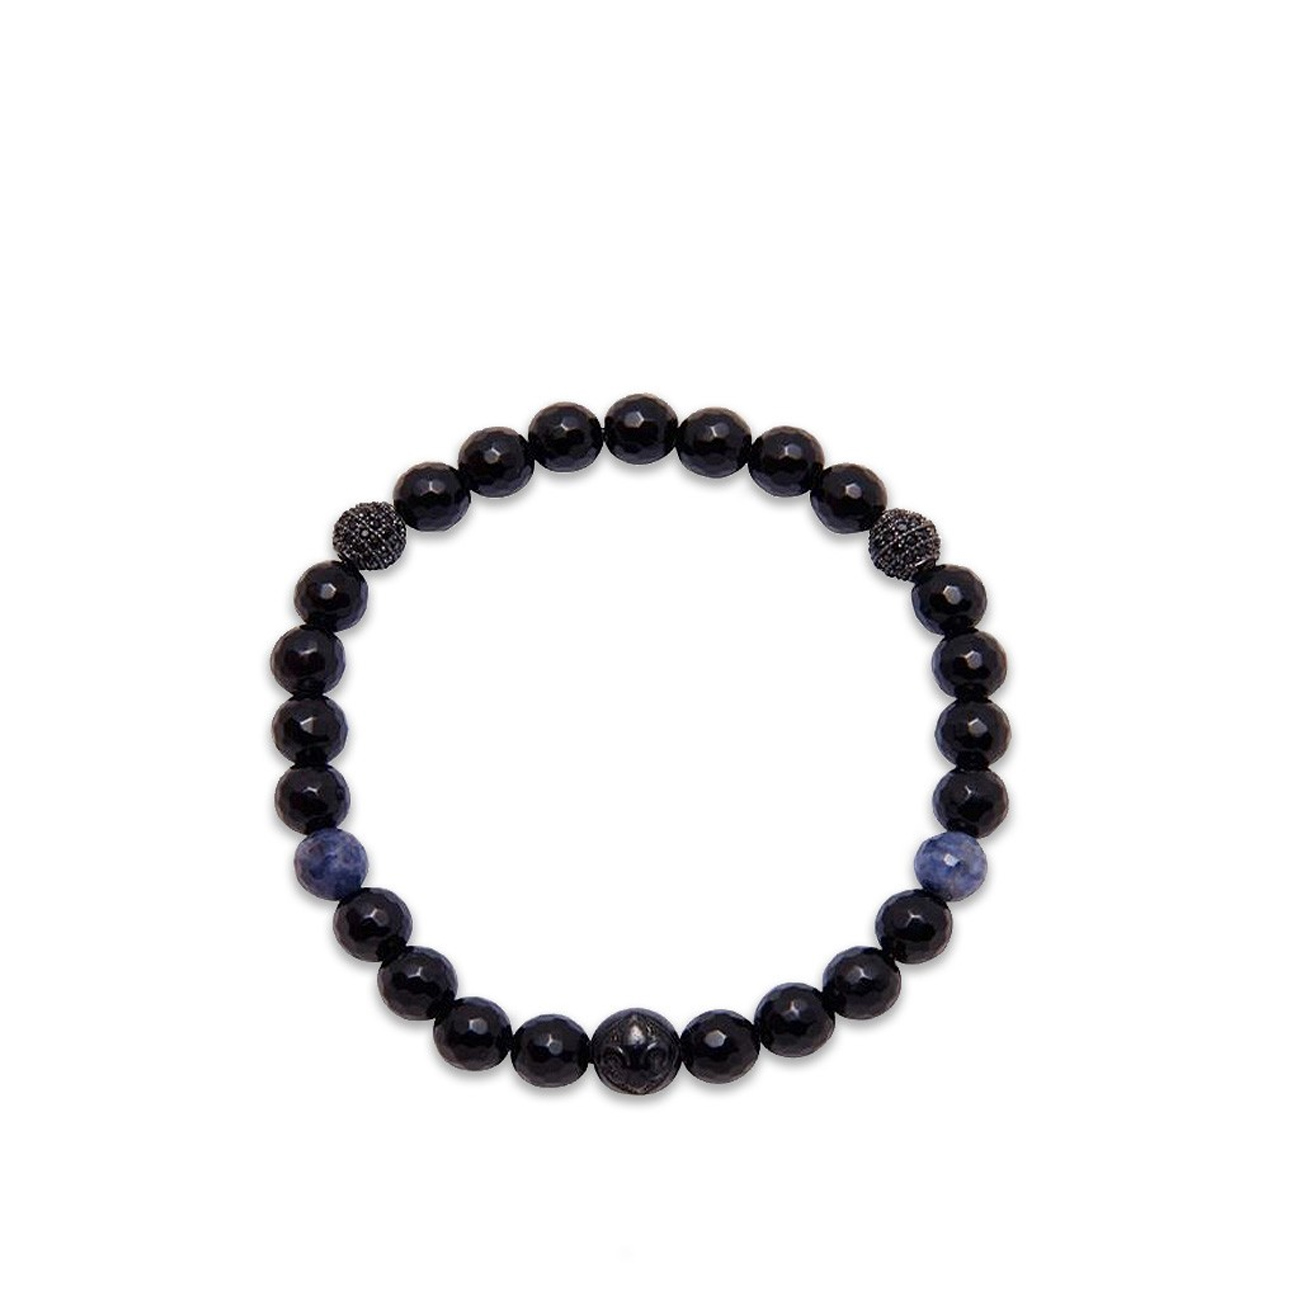 Nialaya Women's Wristband with Black Agate and Blue Dumortierite